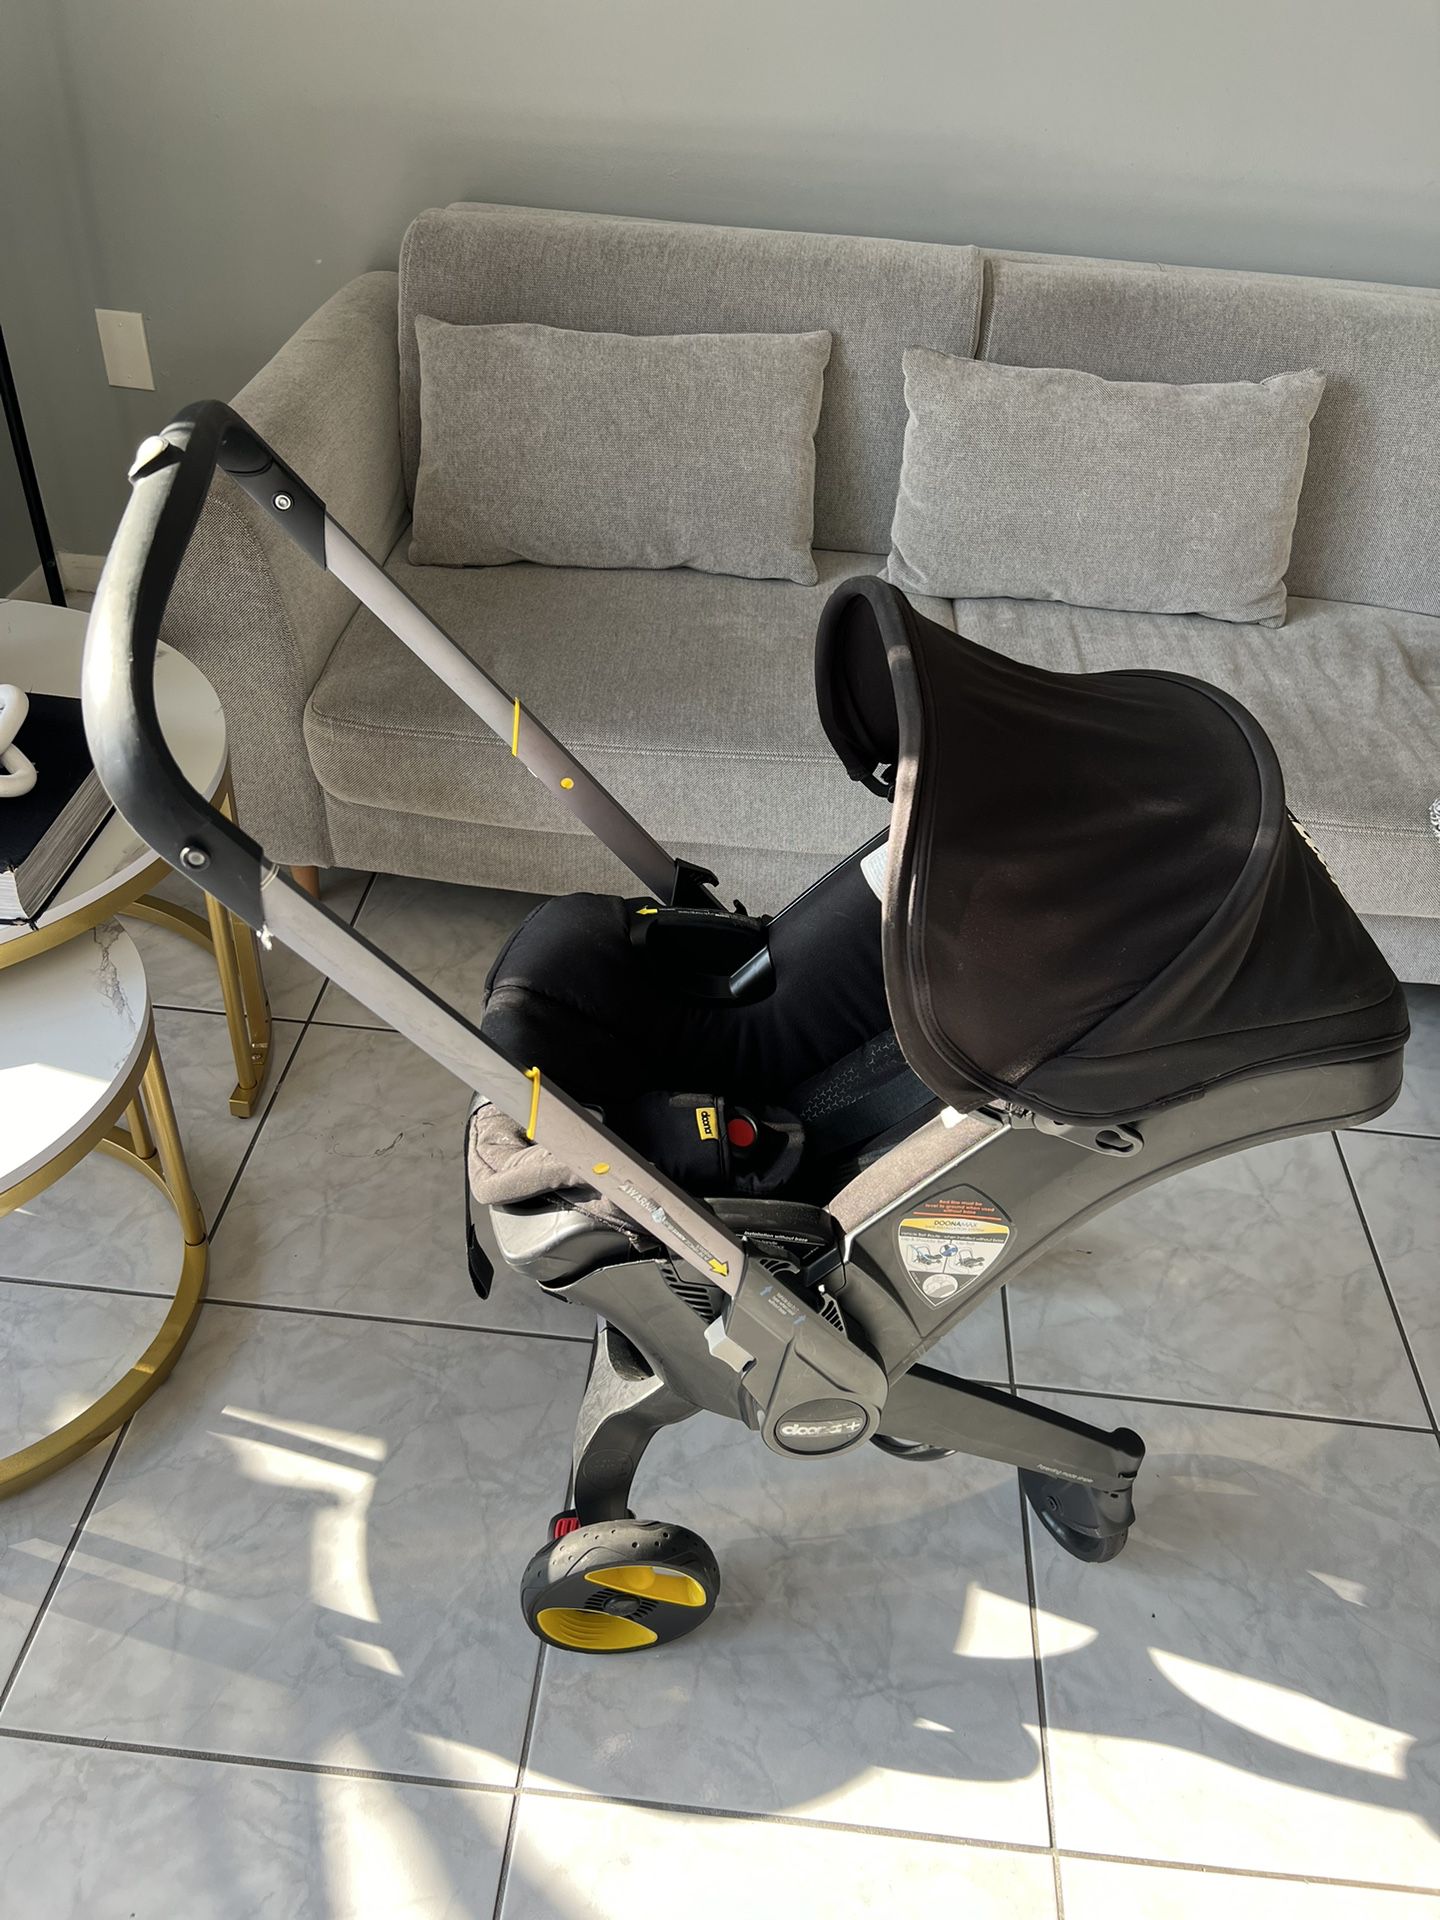 Donna Car Seat And Stroller 